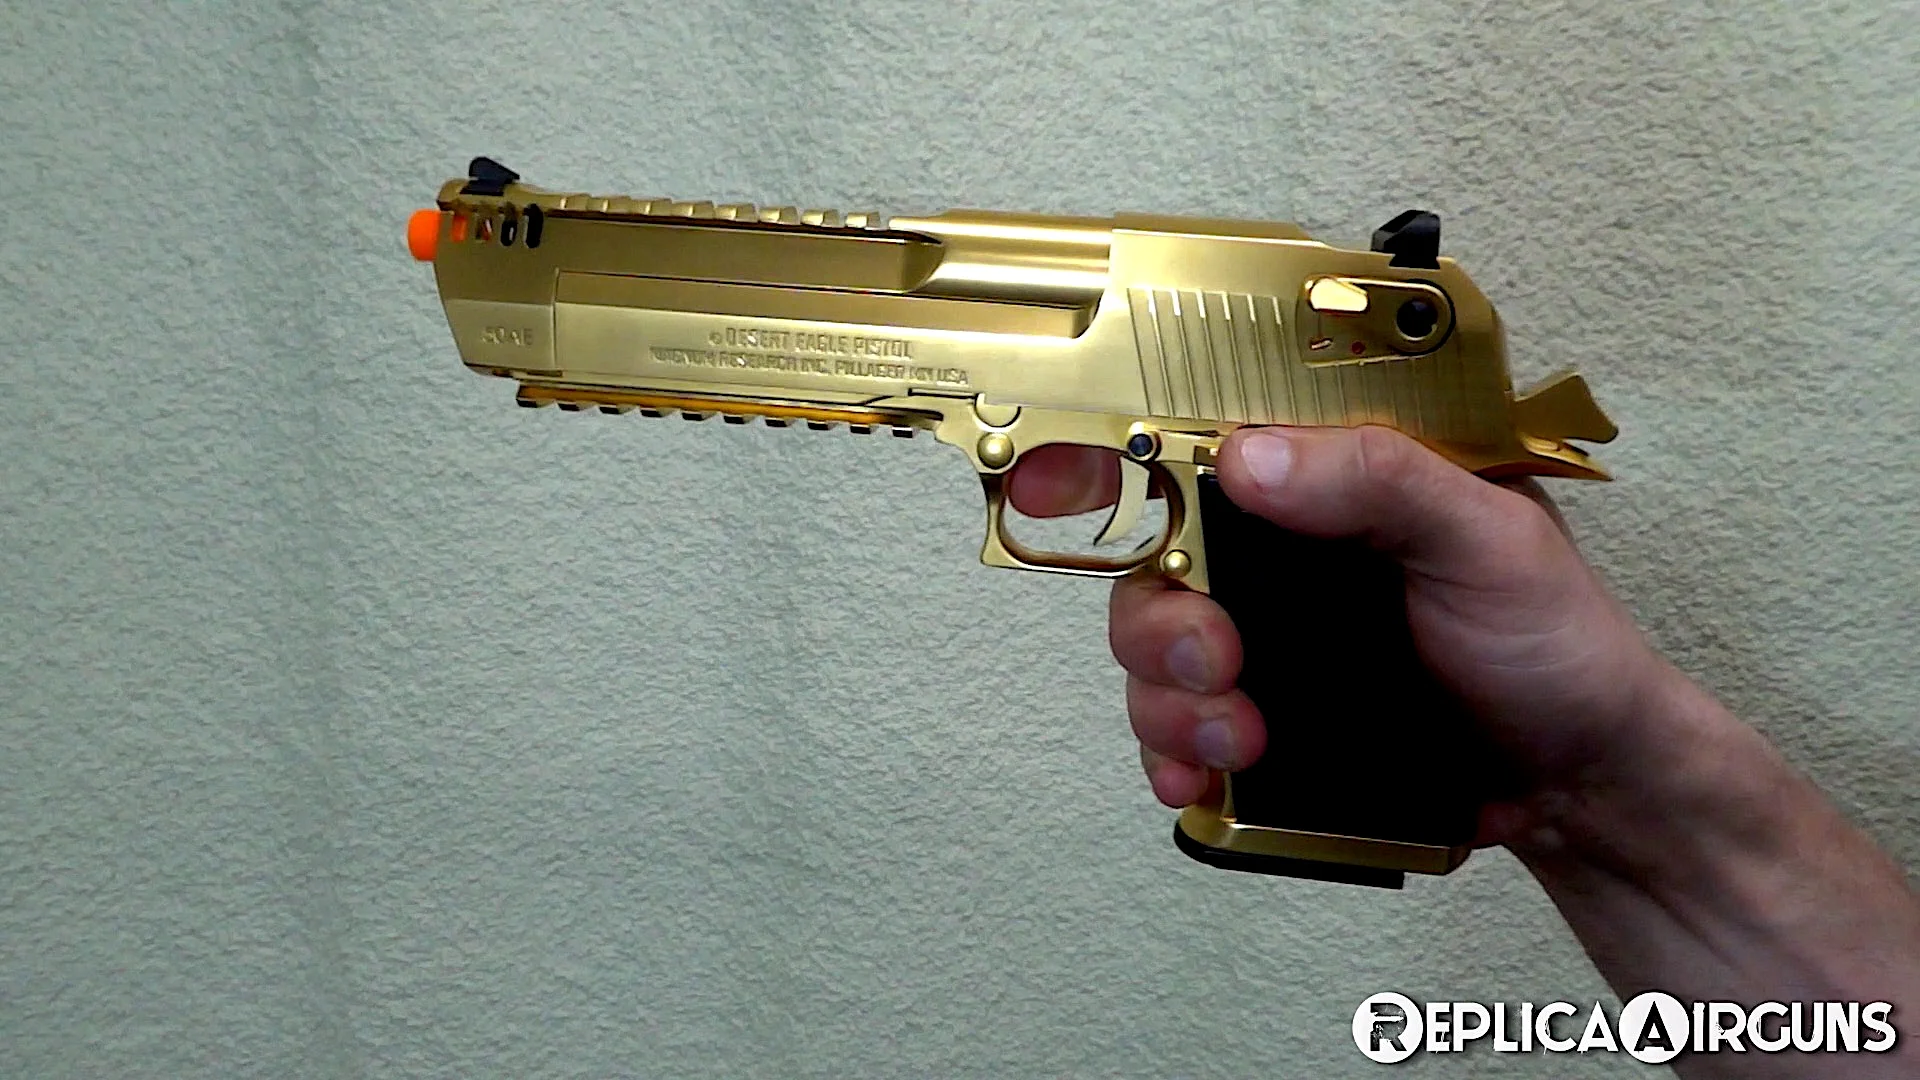 KWC Desert Eagle .50 & Sigma SW40F Blowback Airsoft Pistol Review on Vimeo